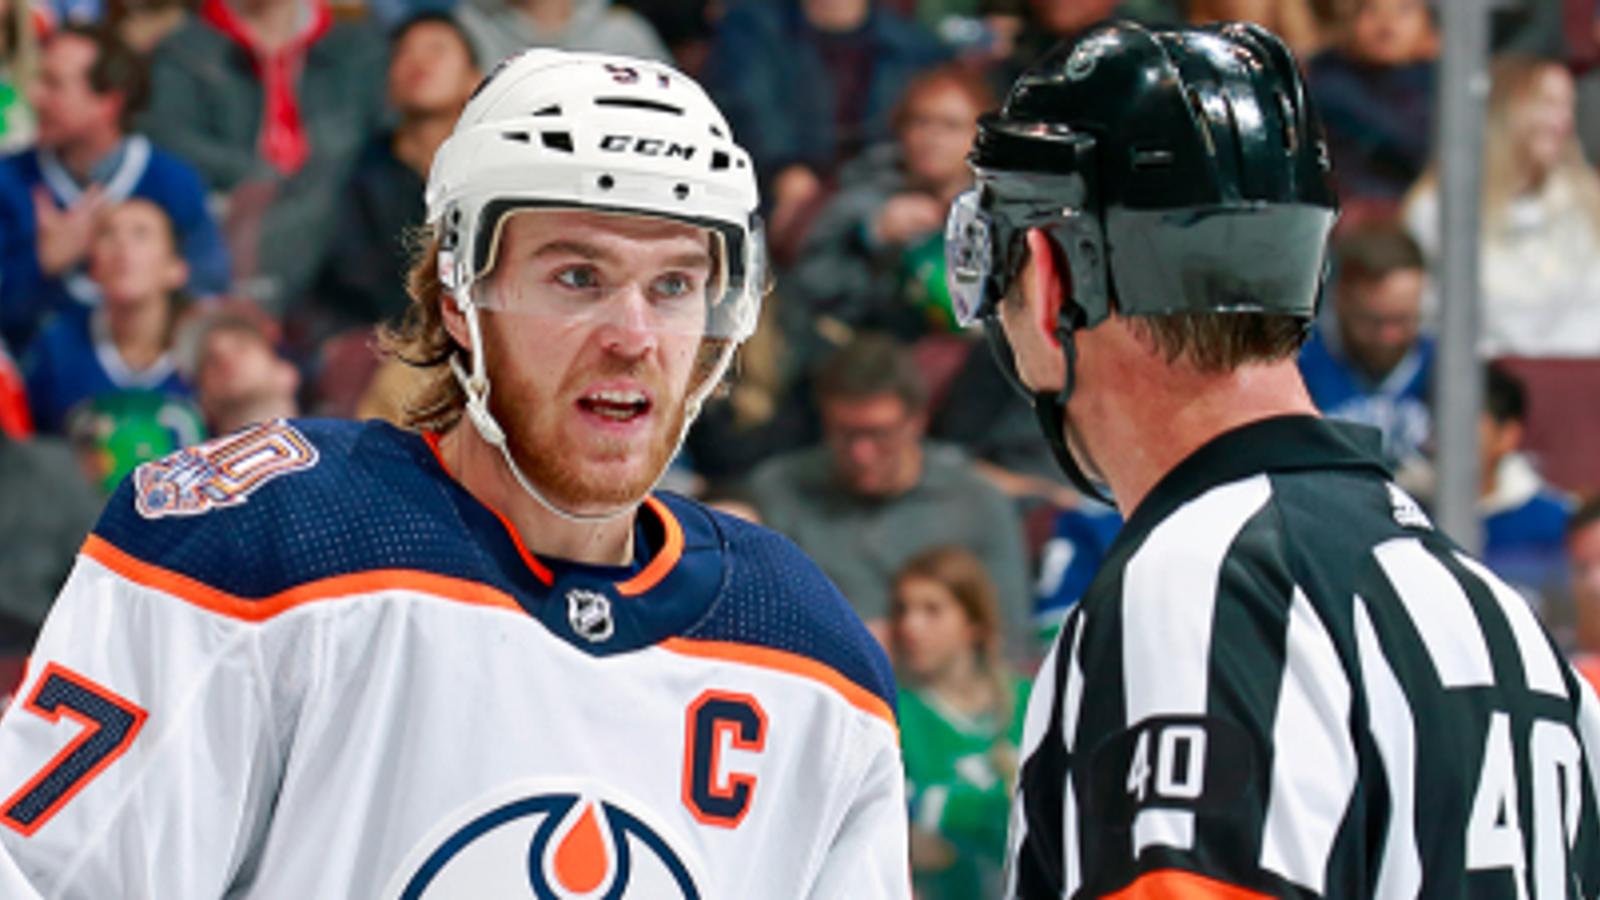 Insider analysis: McDavid was robbed by the referees! 